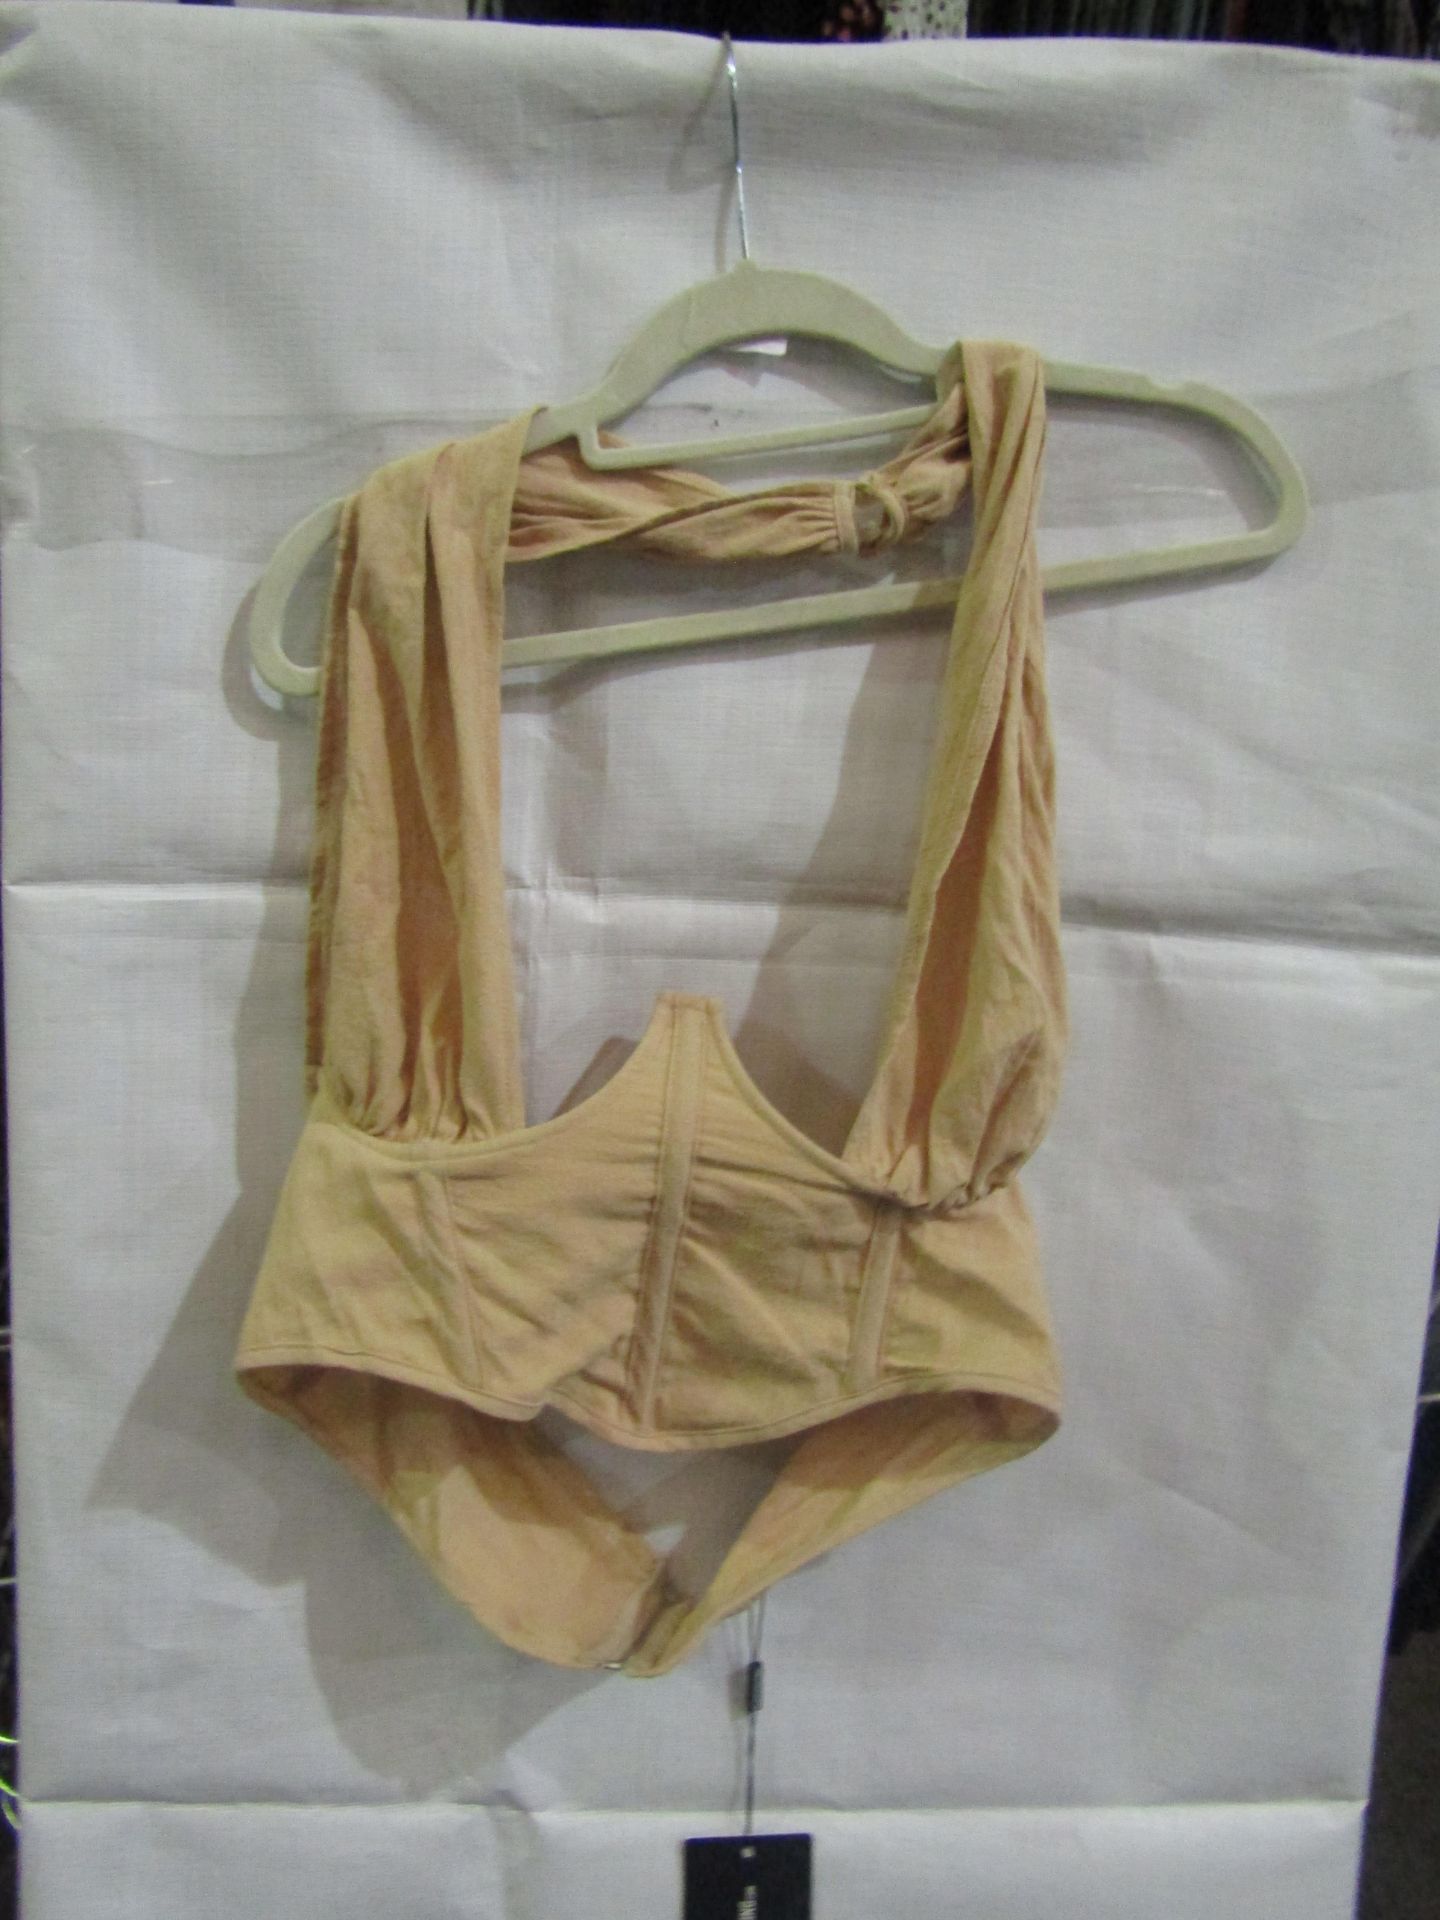 2x Pretty Little Thing Oatmeal Linen Look Cross Front Corset- Size 12, New & Packaged.